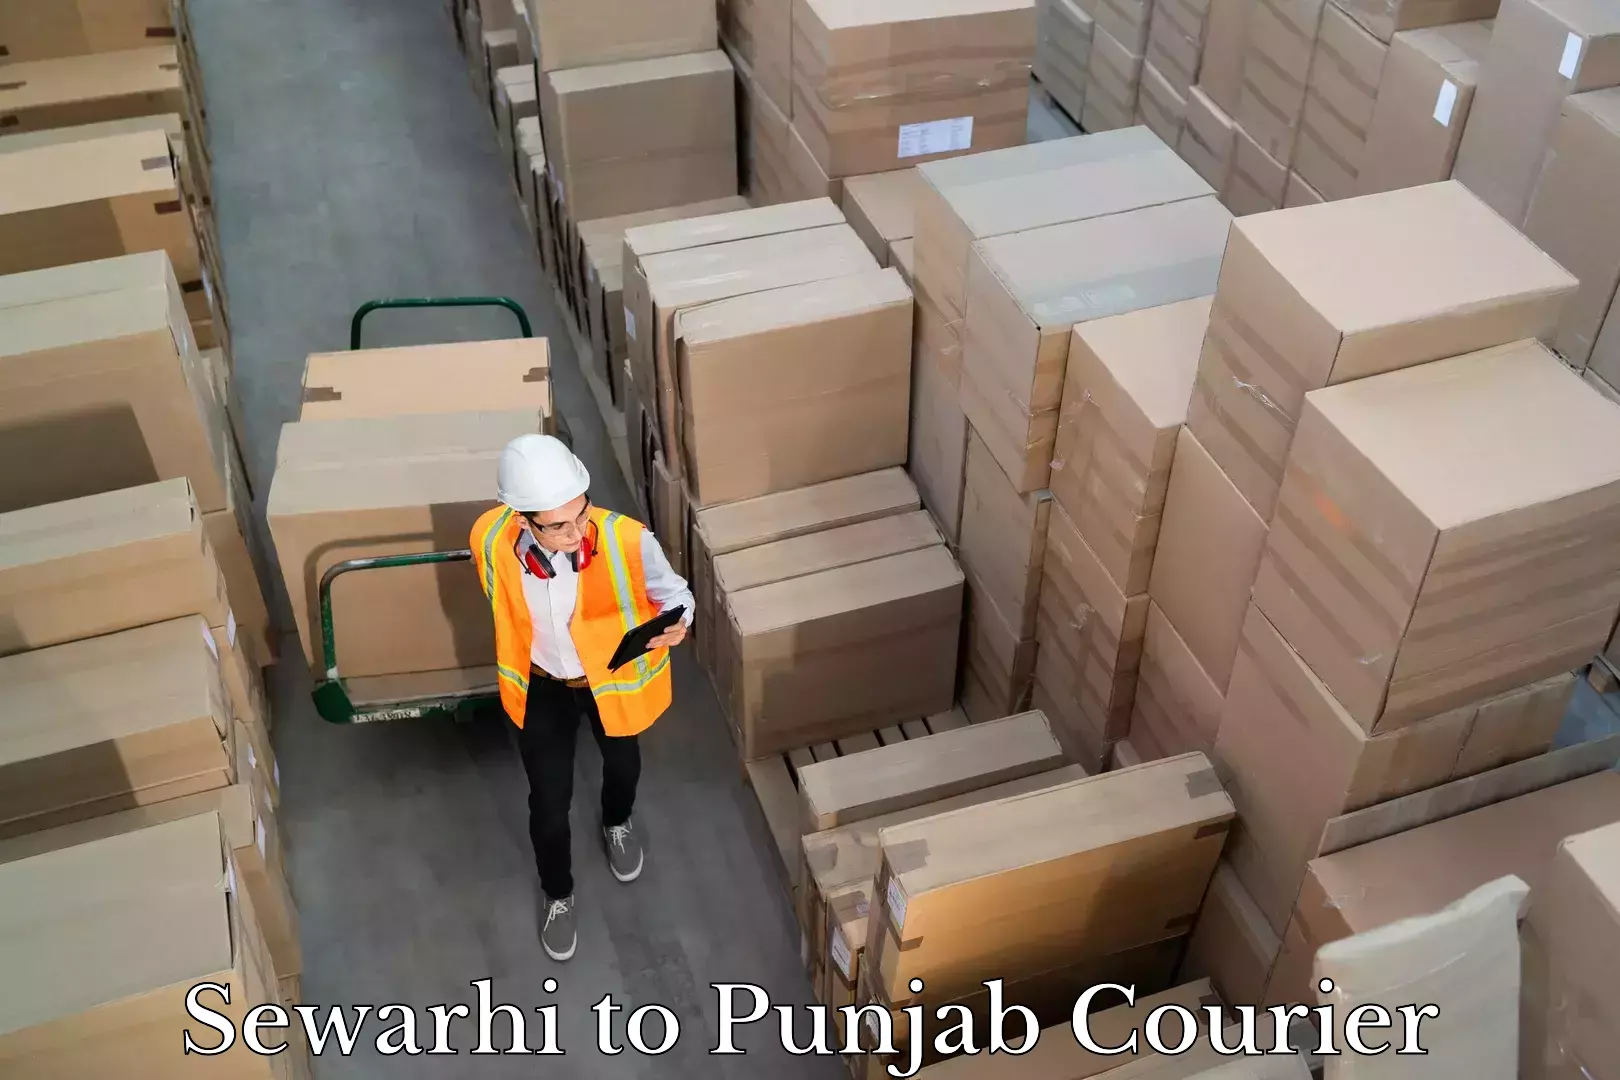 Cost-effective courier options Sewarhi to Punjab